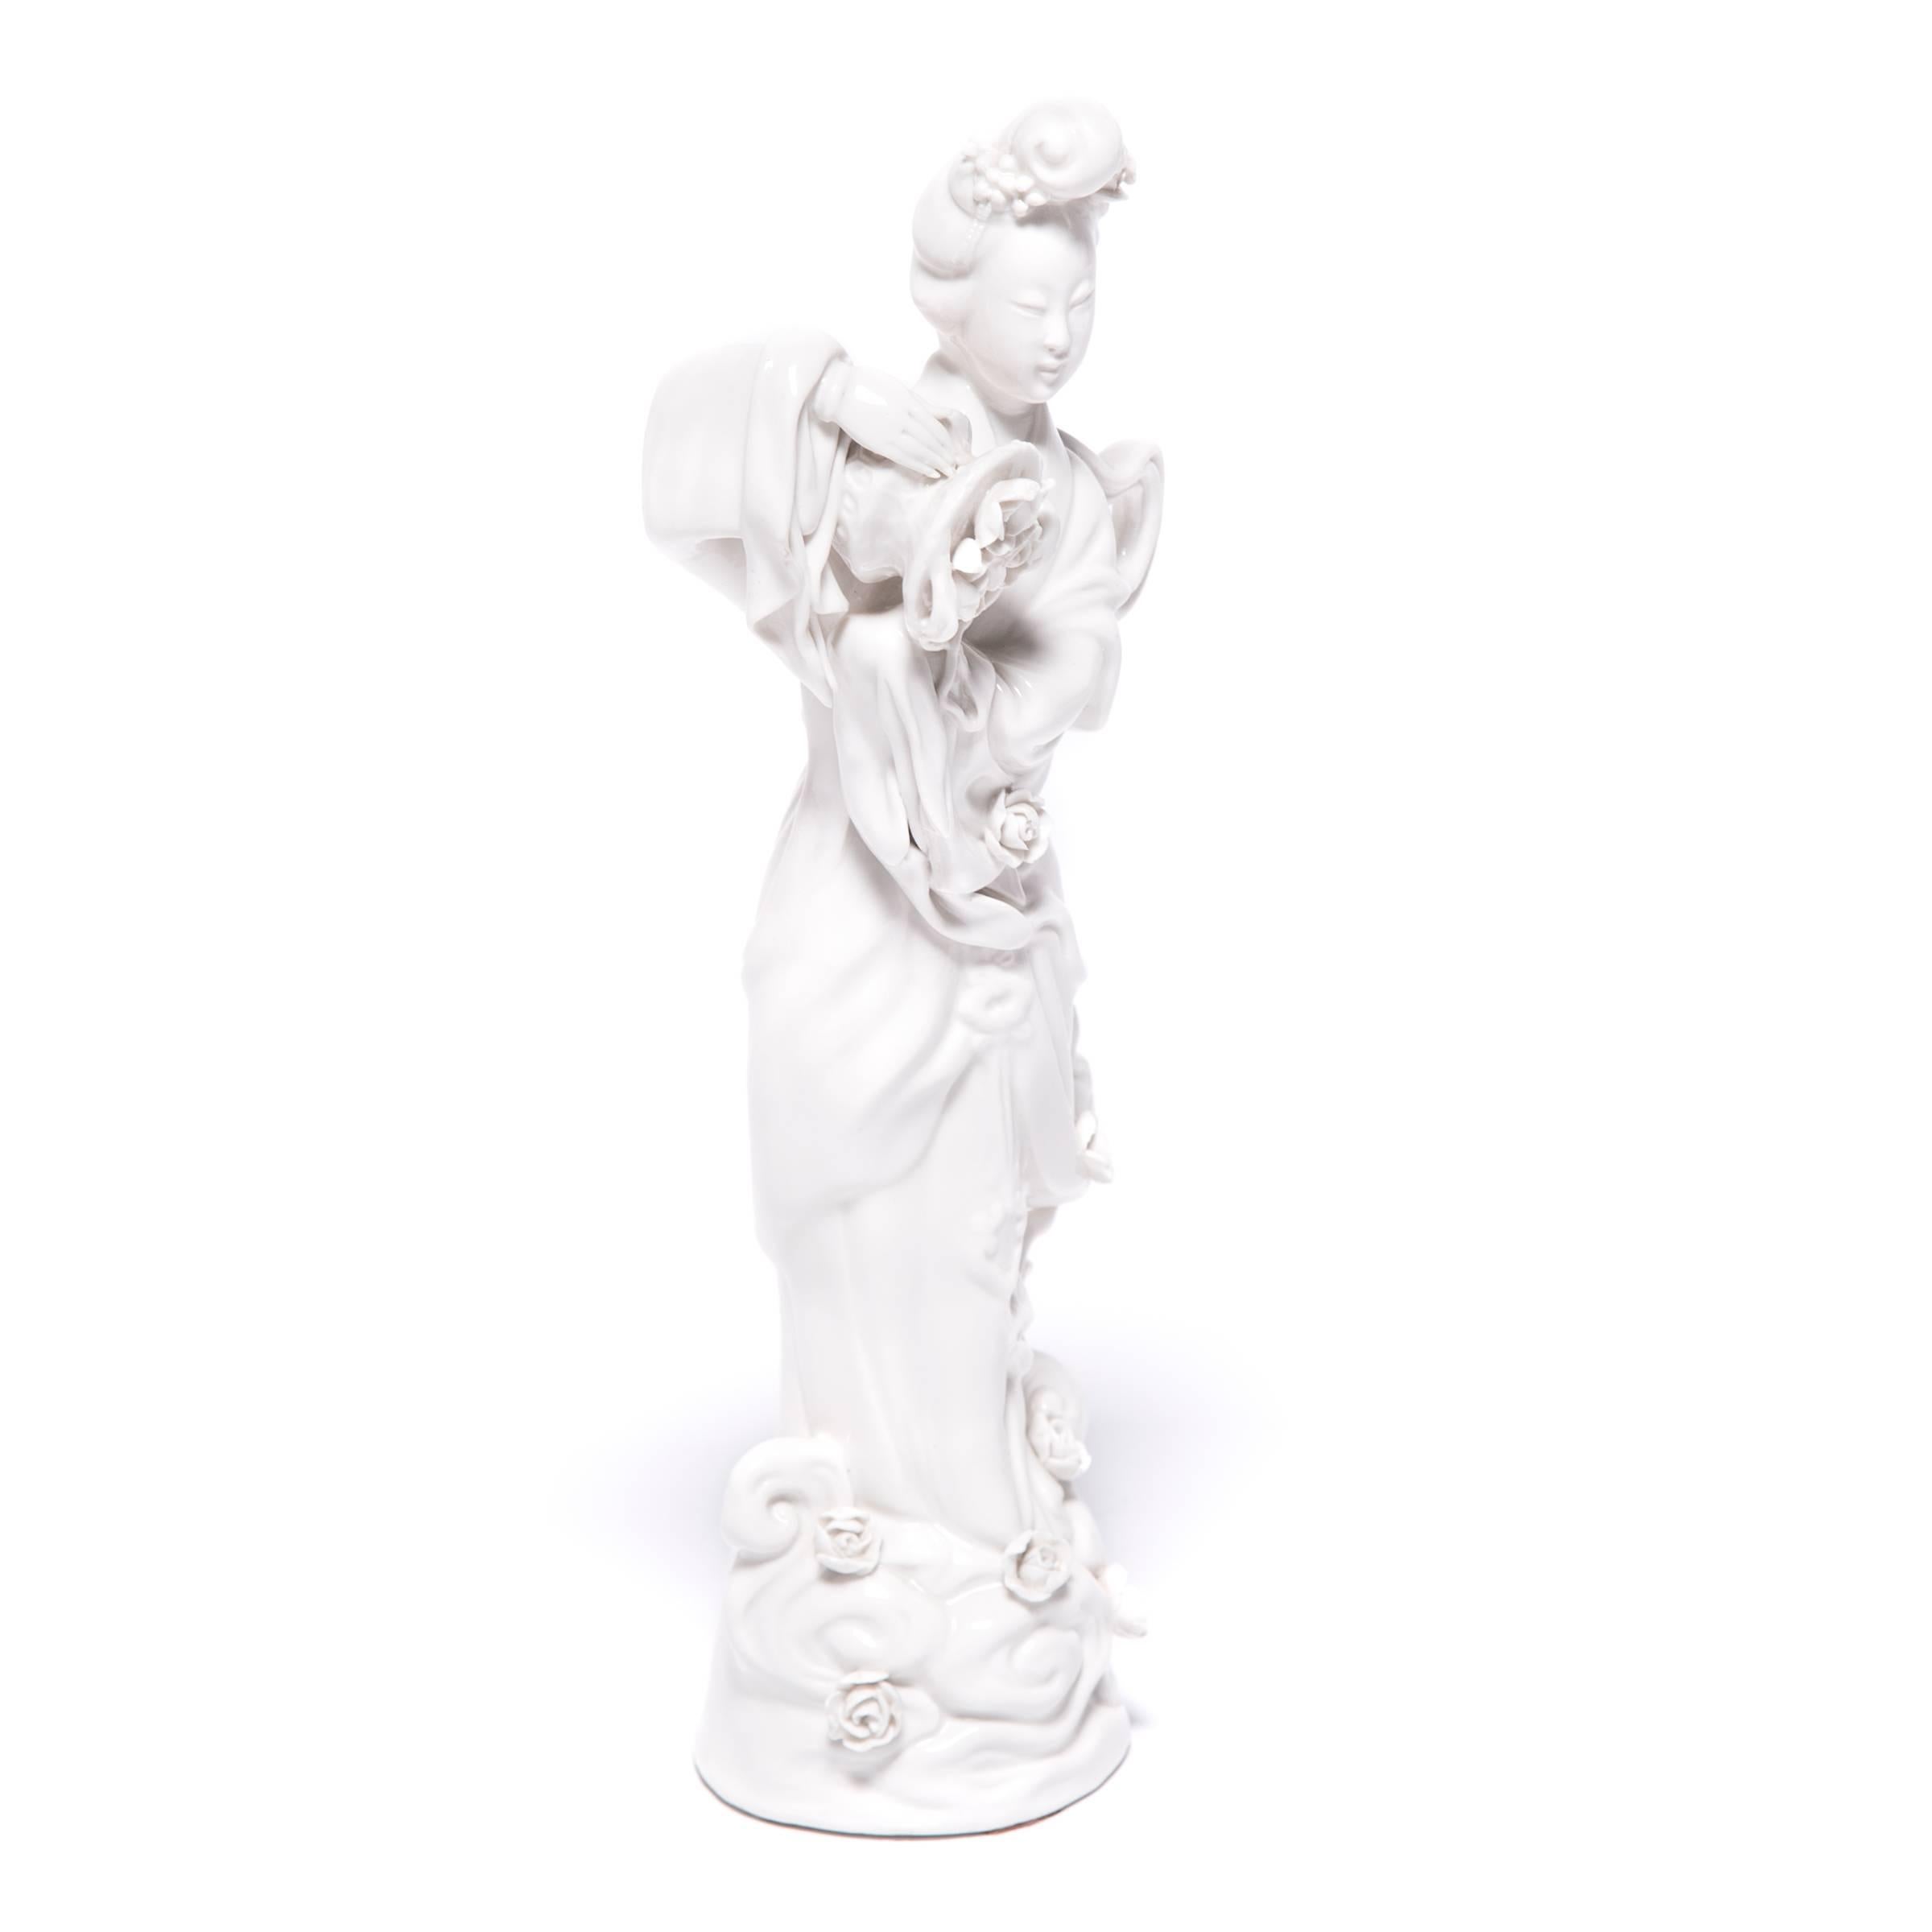 A symbol of compassion and wisdom, Guan Yin is a bodhisattva venerated by Buddhists and Taoists alike. This exquisite porcelain sculpture from circa 1900 depicts the serene-faced goddess spilling roses from a basket. The blossoms cascade down her